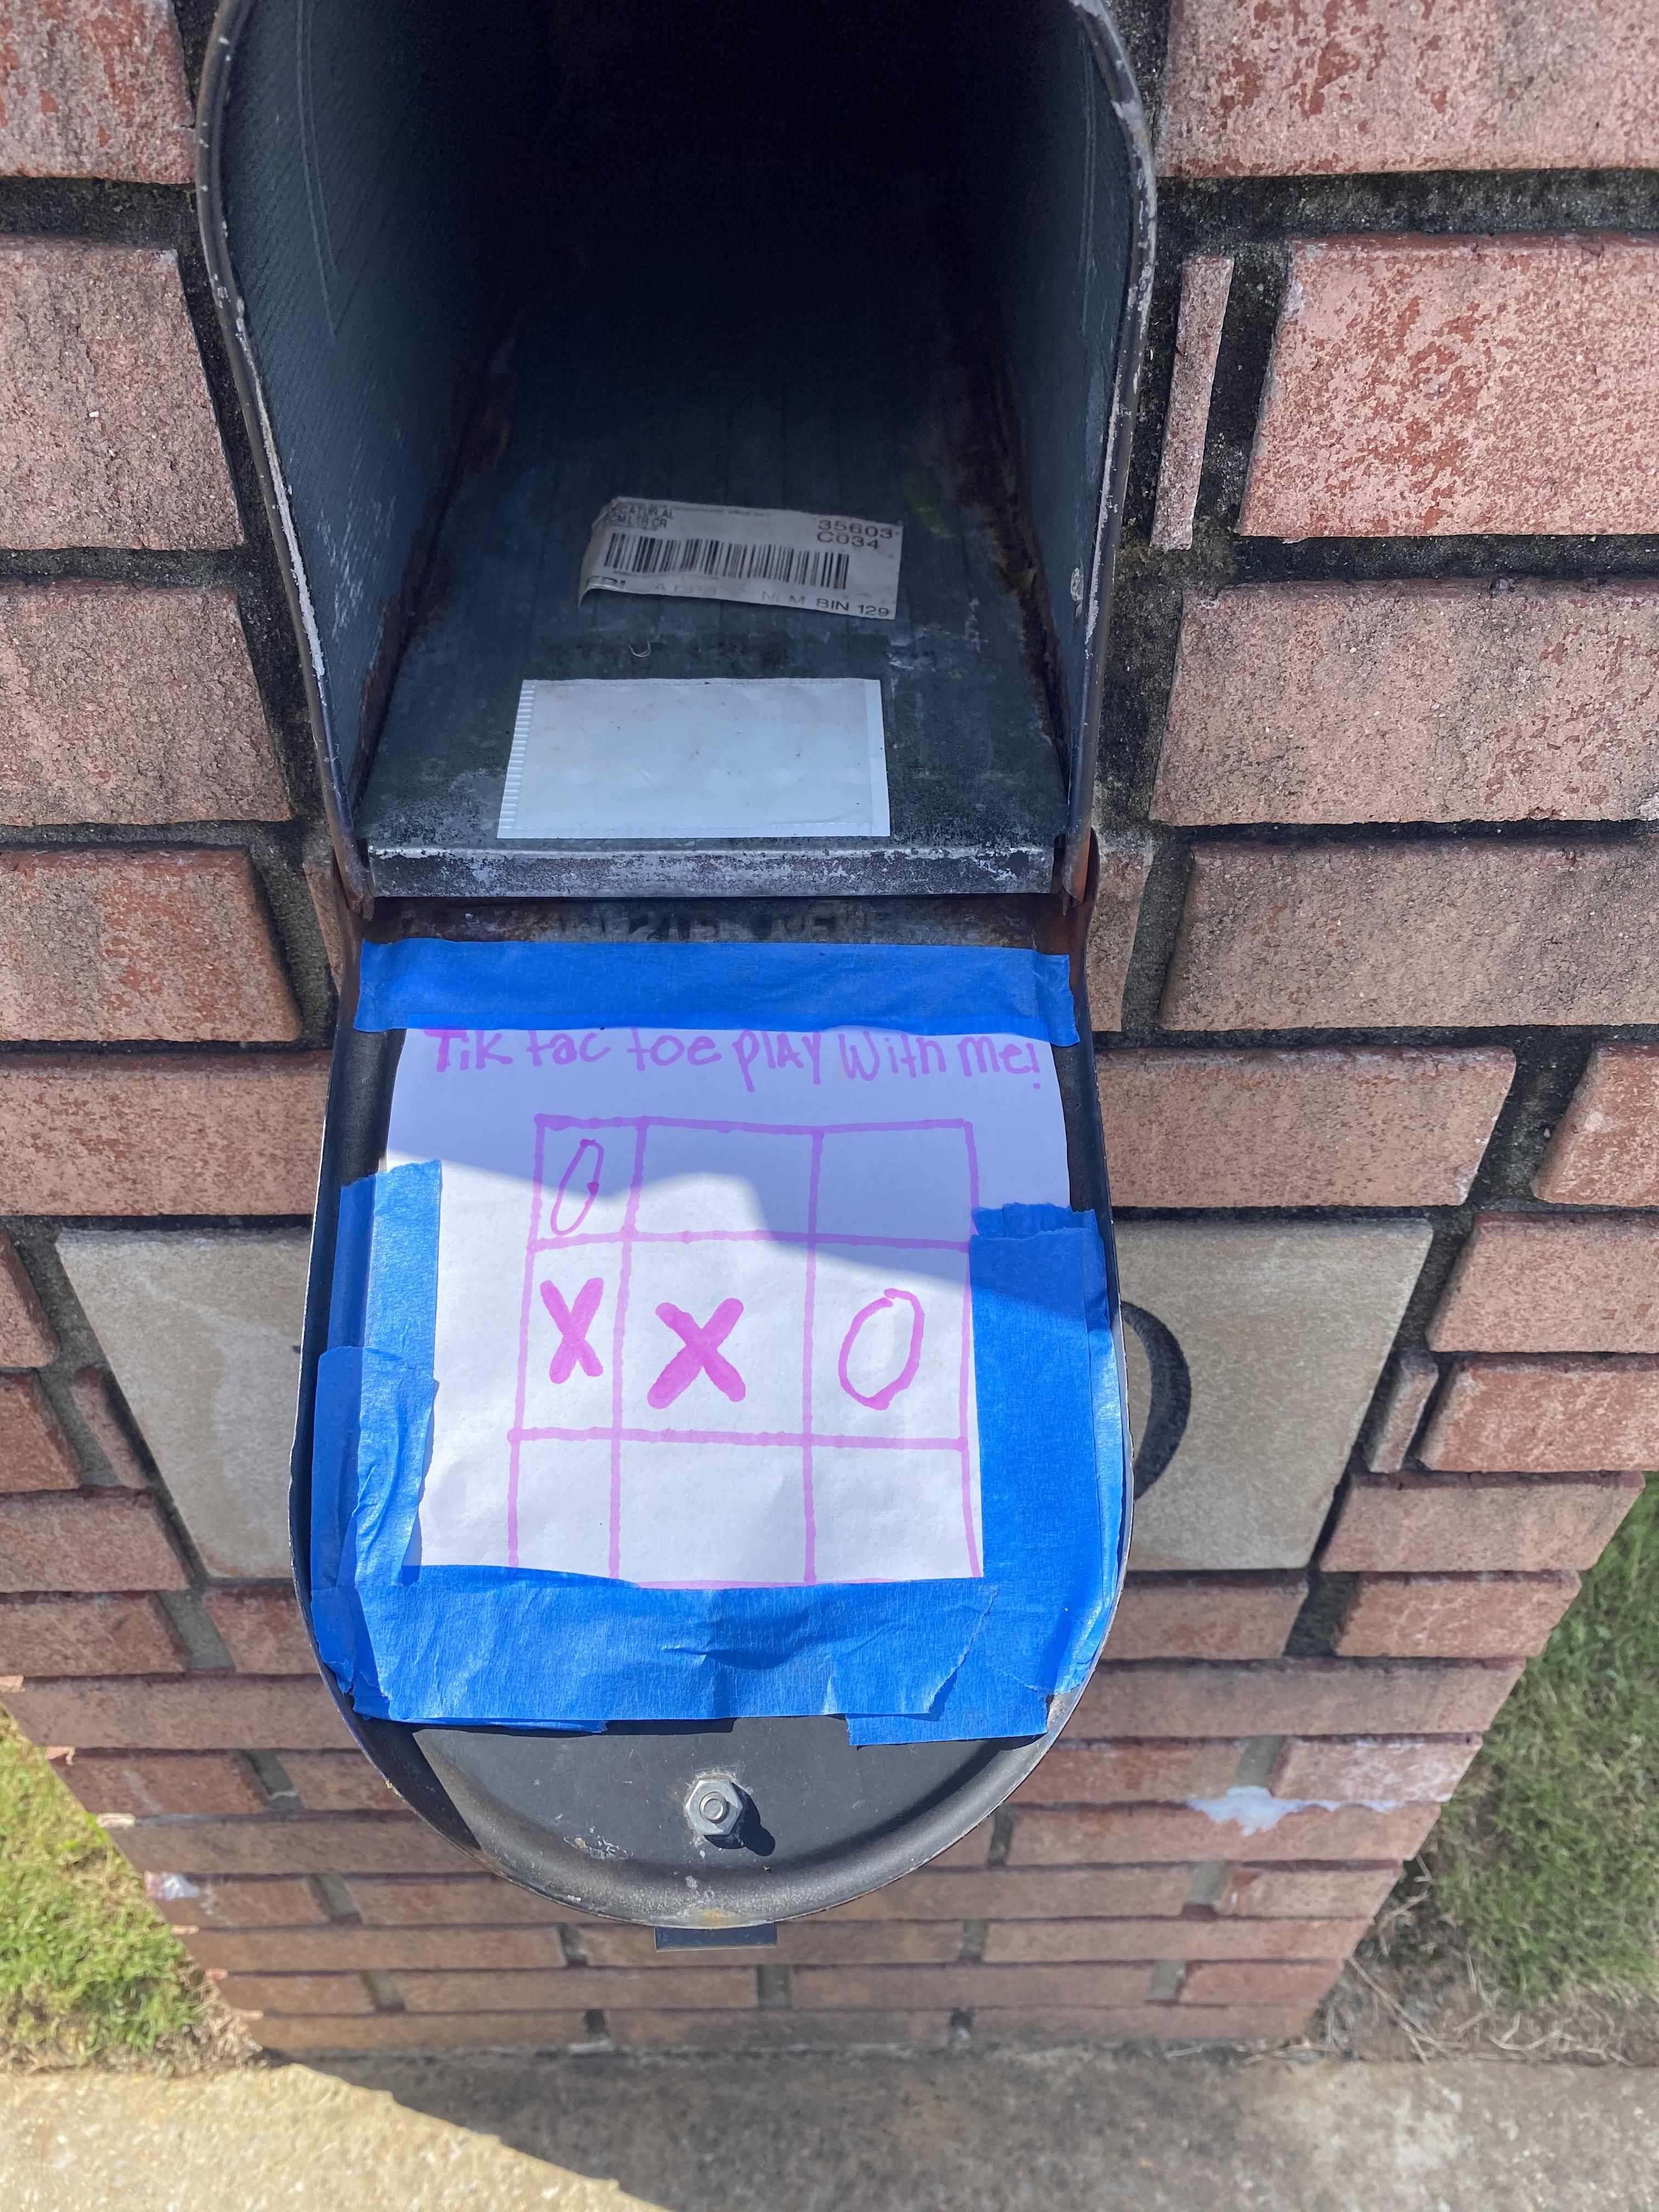 My 11 y/o daughter has insisted on checking the mail the last couple of days. Today, I checked it. This is what I found...